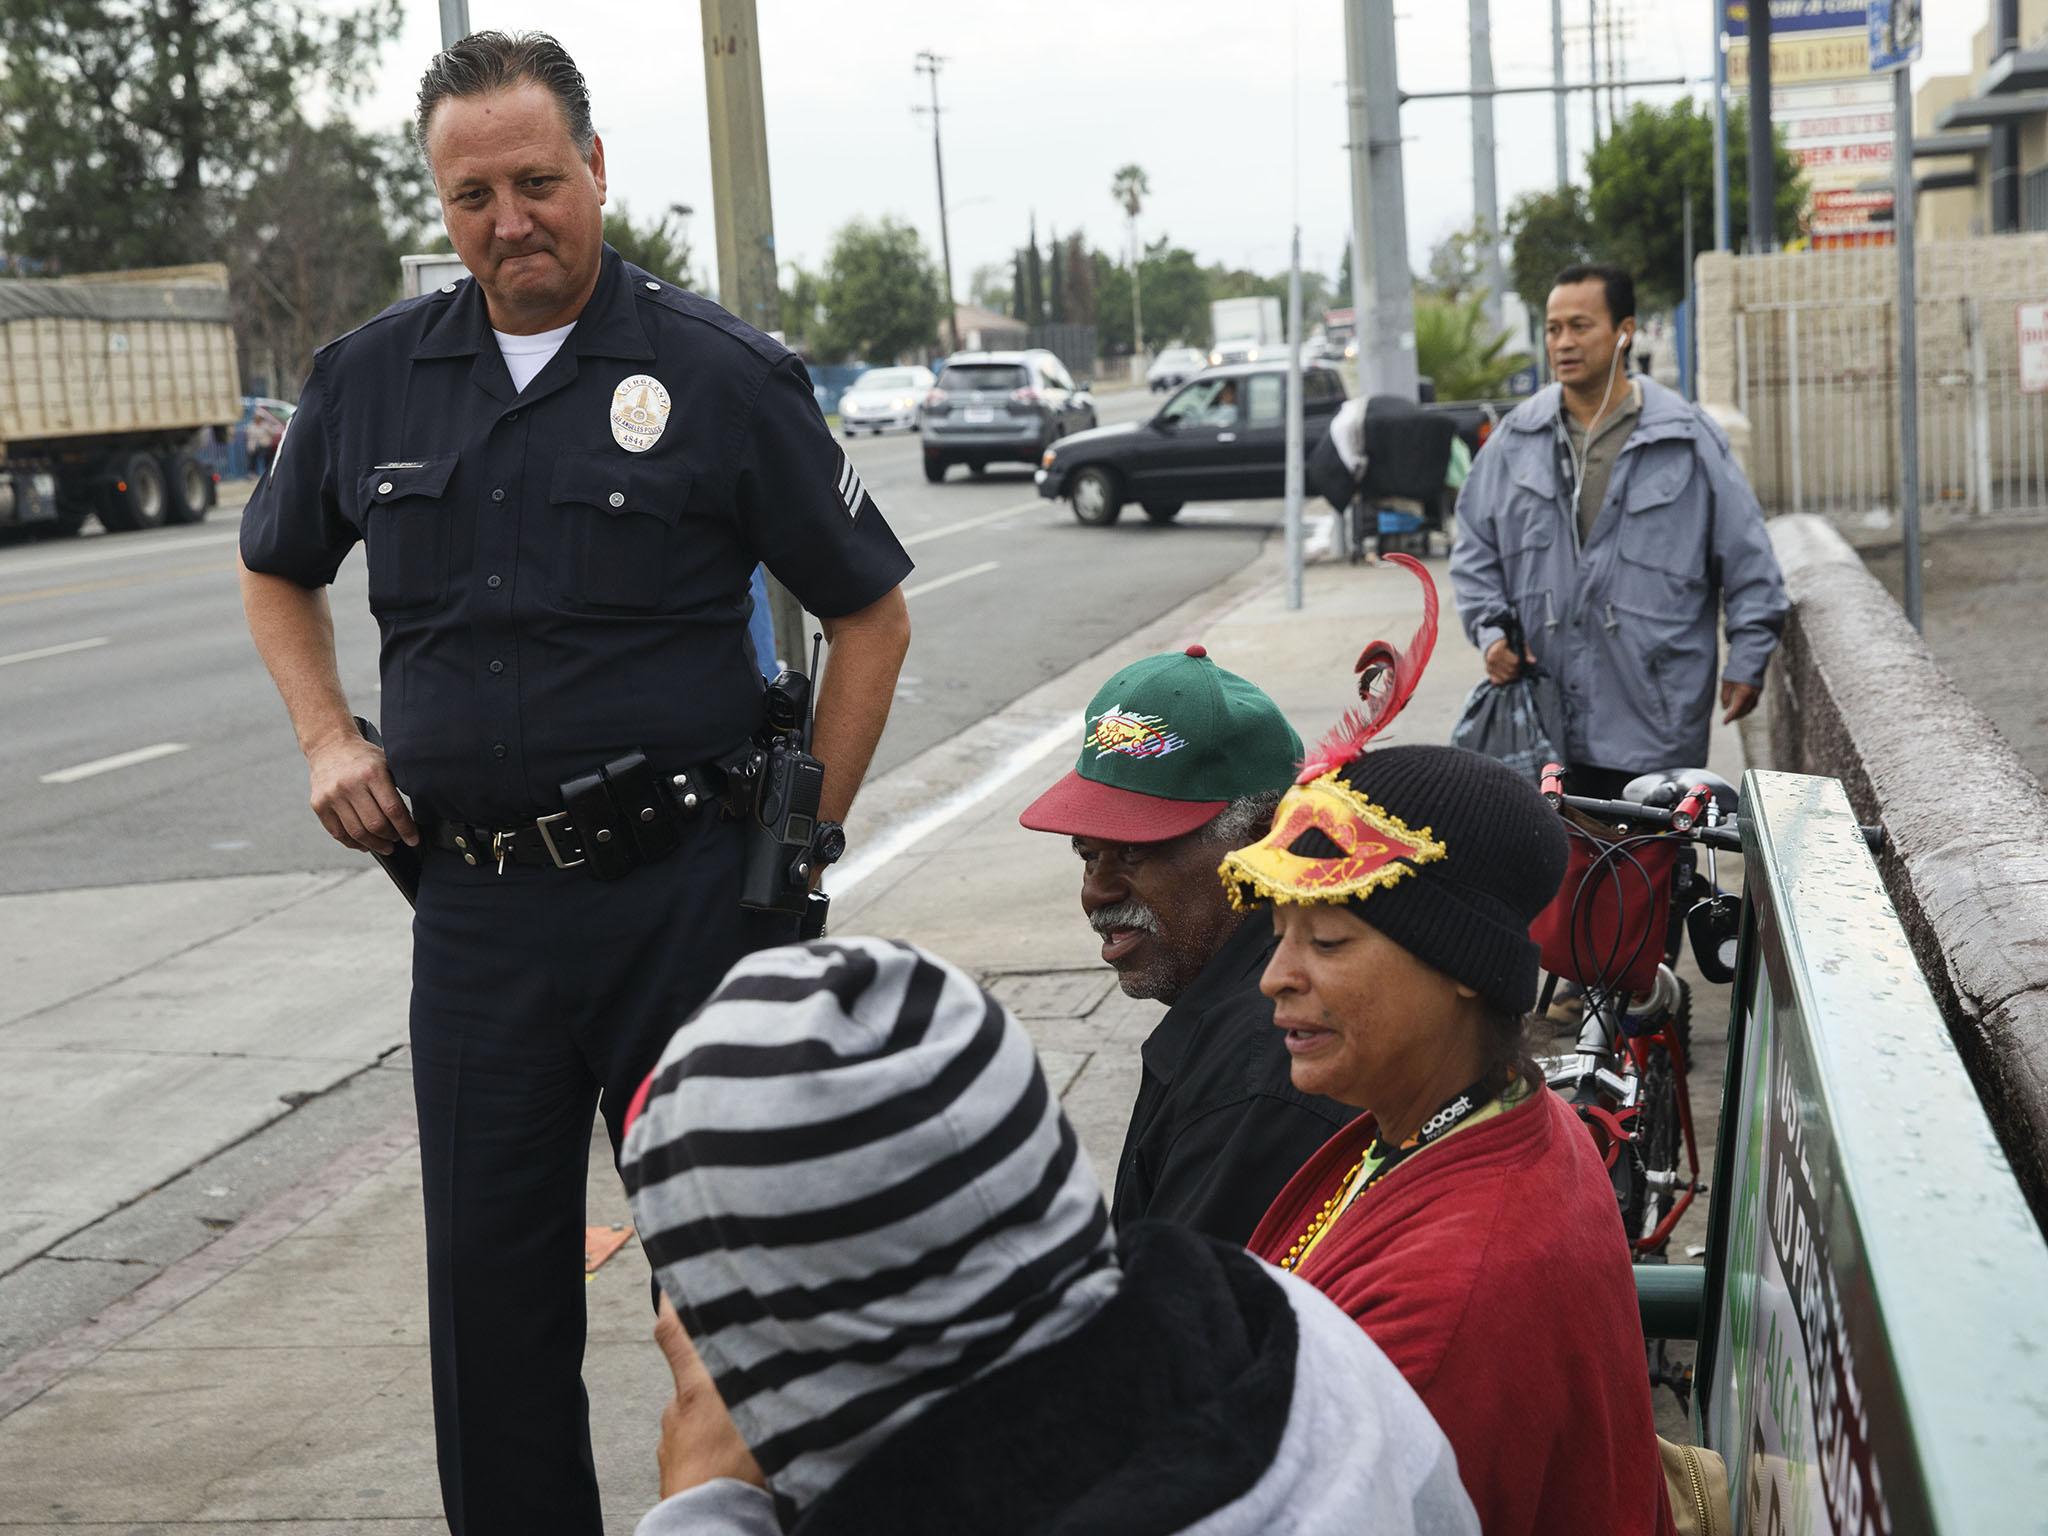 Sgt Coleman speaks with local people at a bus stop on his beat (Patrick T Fallon)